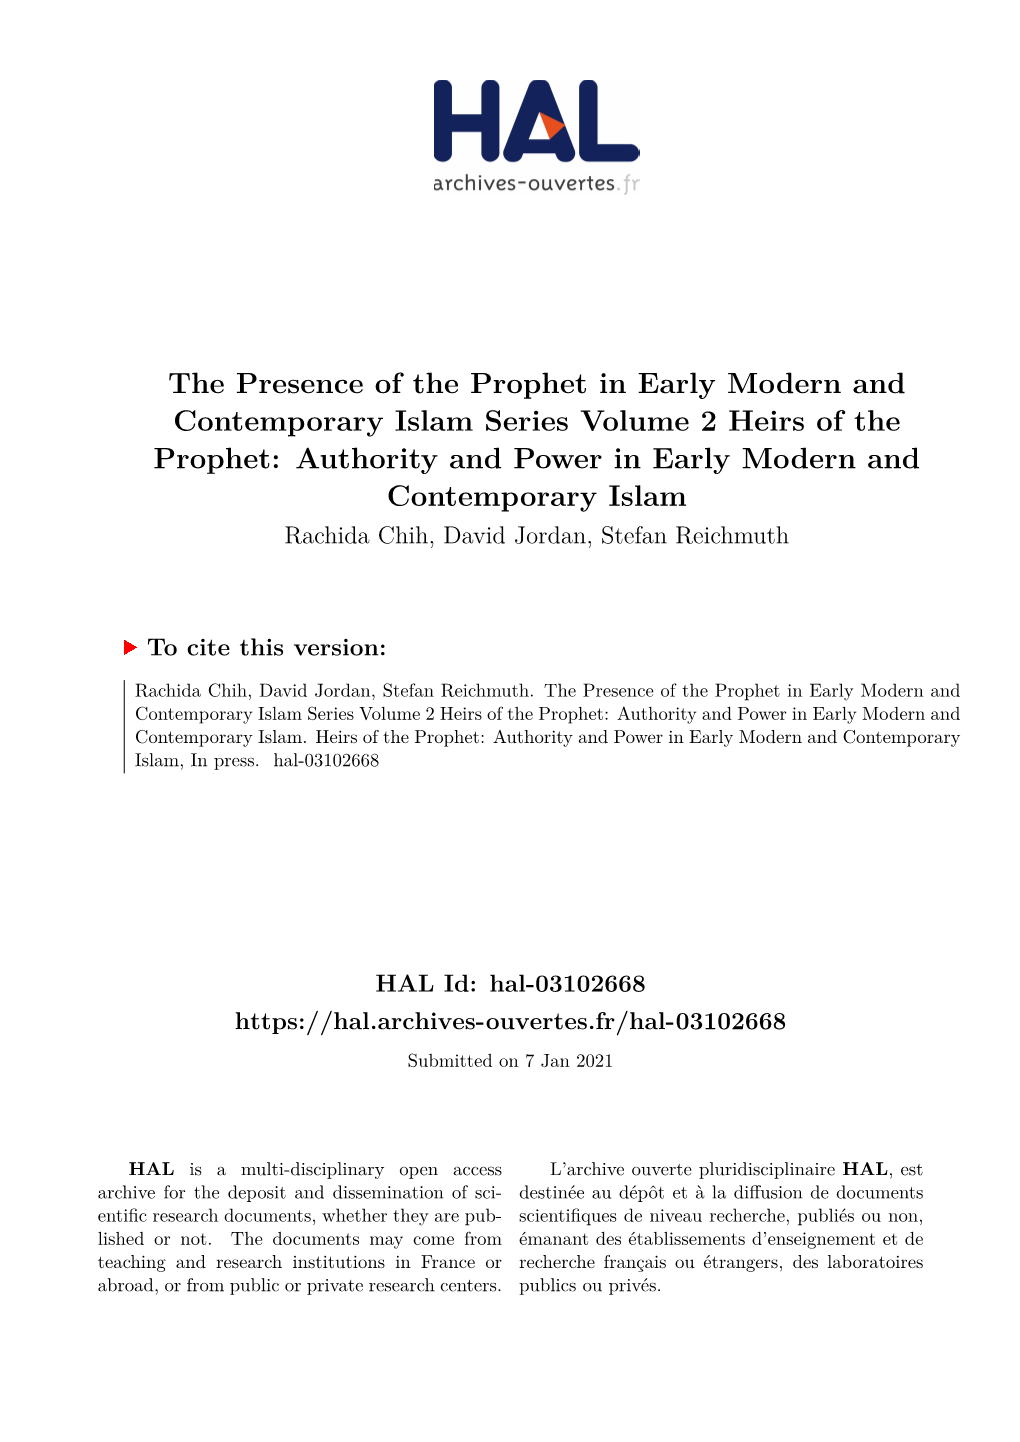 The Presence of the Prophet in Early Modern and Contemporary Islam Series Volume 2 Heirs of the Prophet